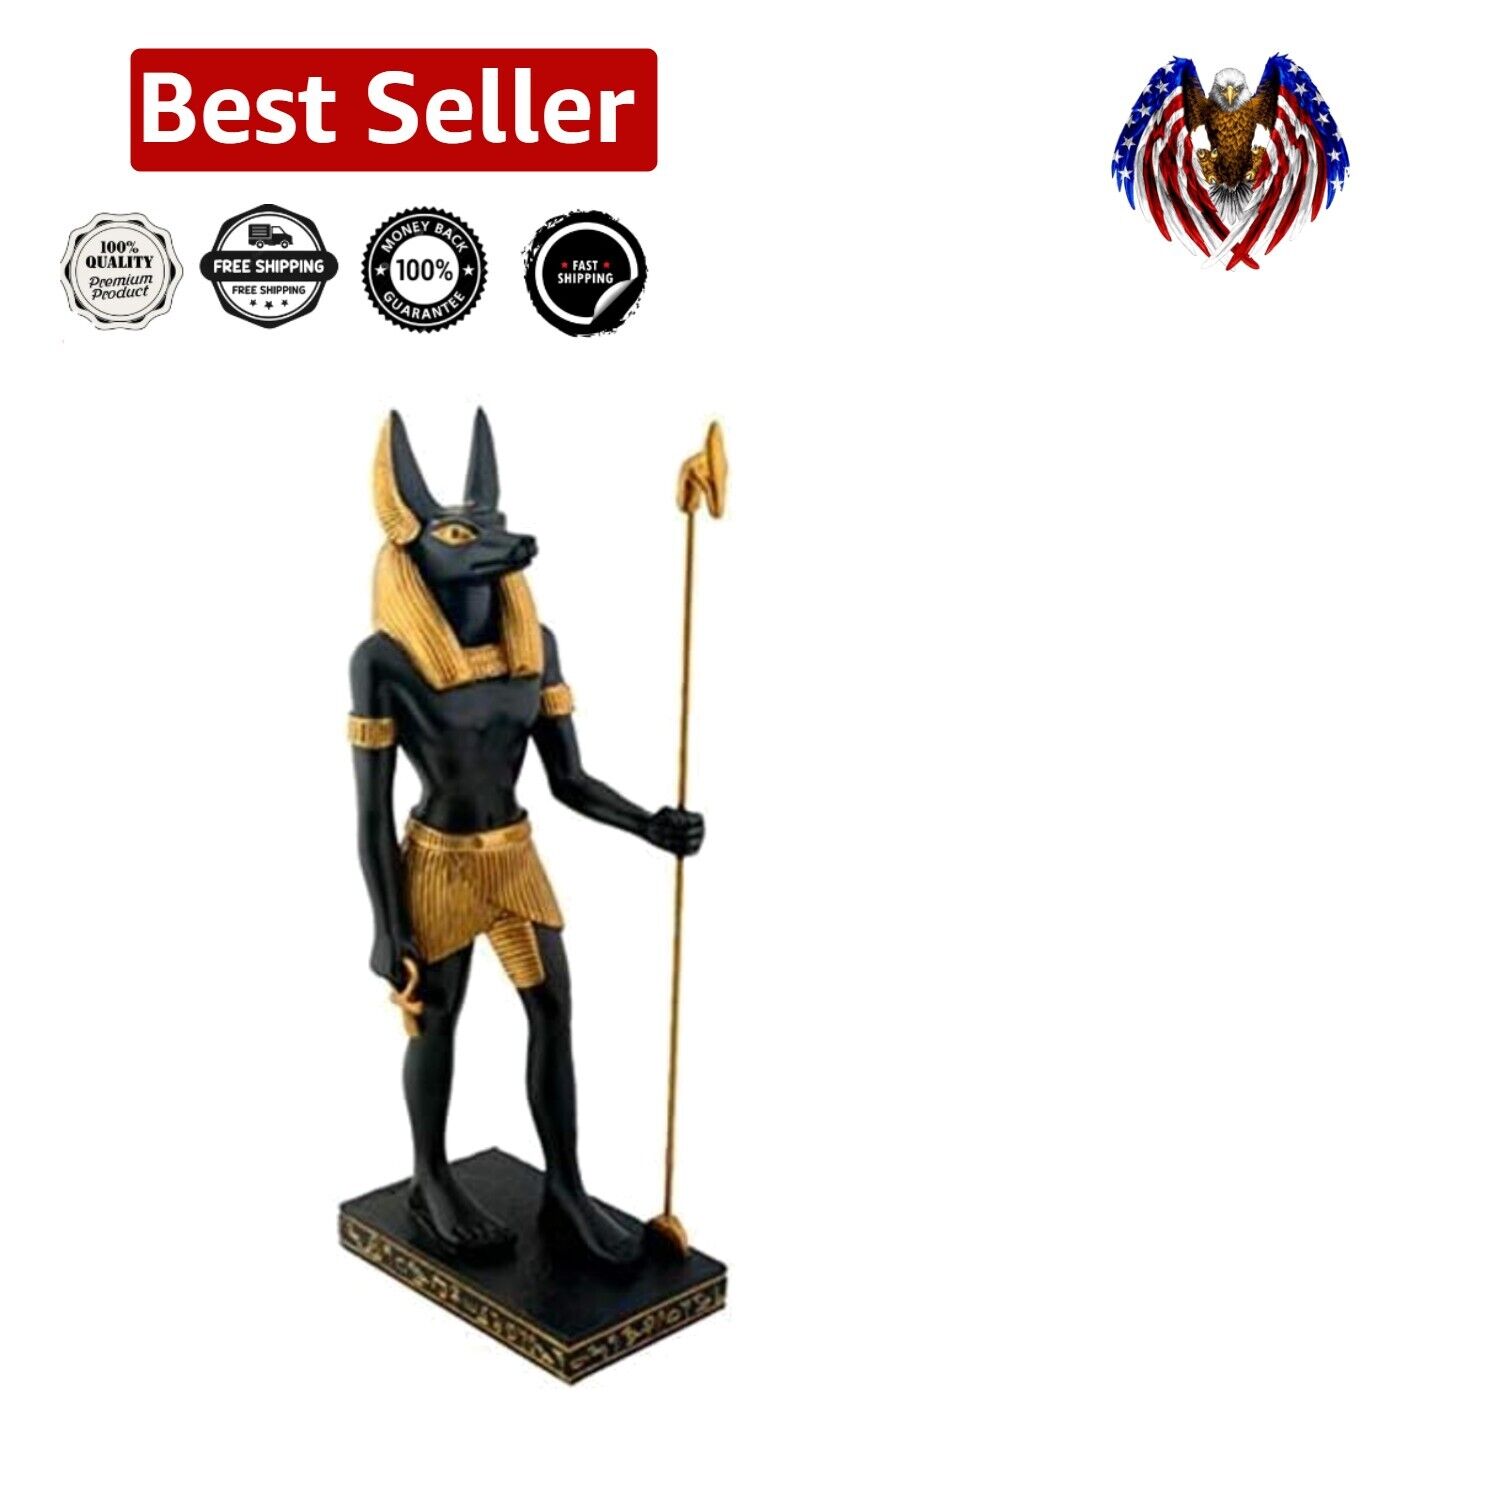 Hand-Painted Egyptian Anubis Deity Figurine - Collectible Statue for Home Decor